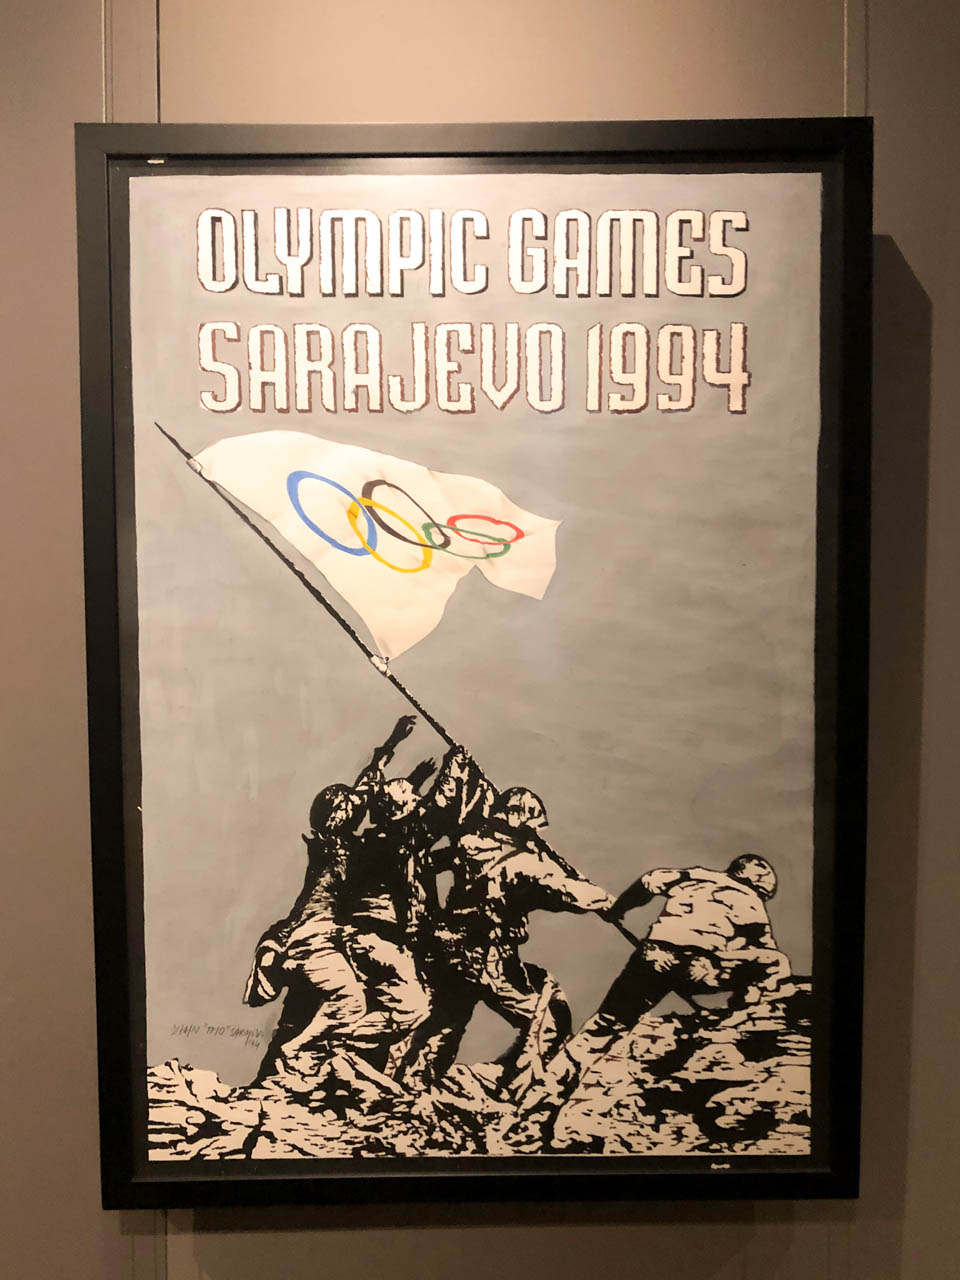 A sign that says "Olympic Games Sarajevo 1994"